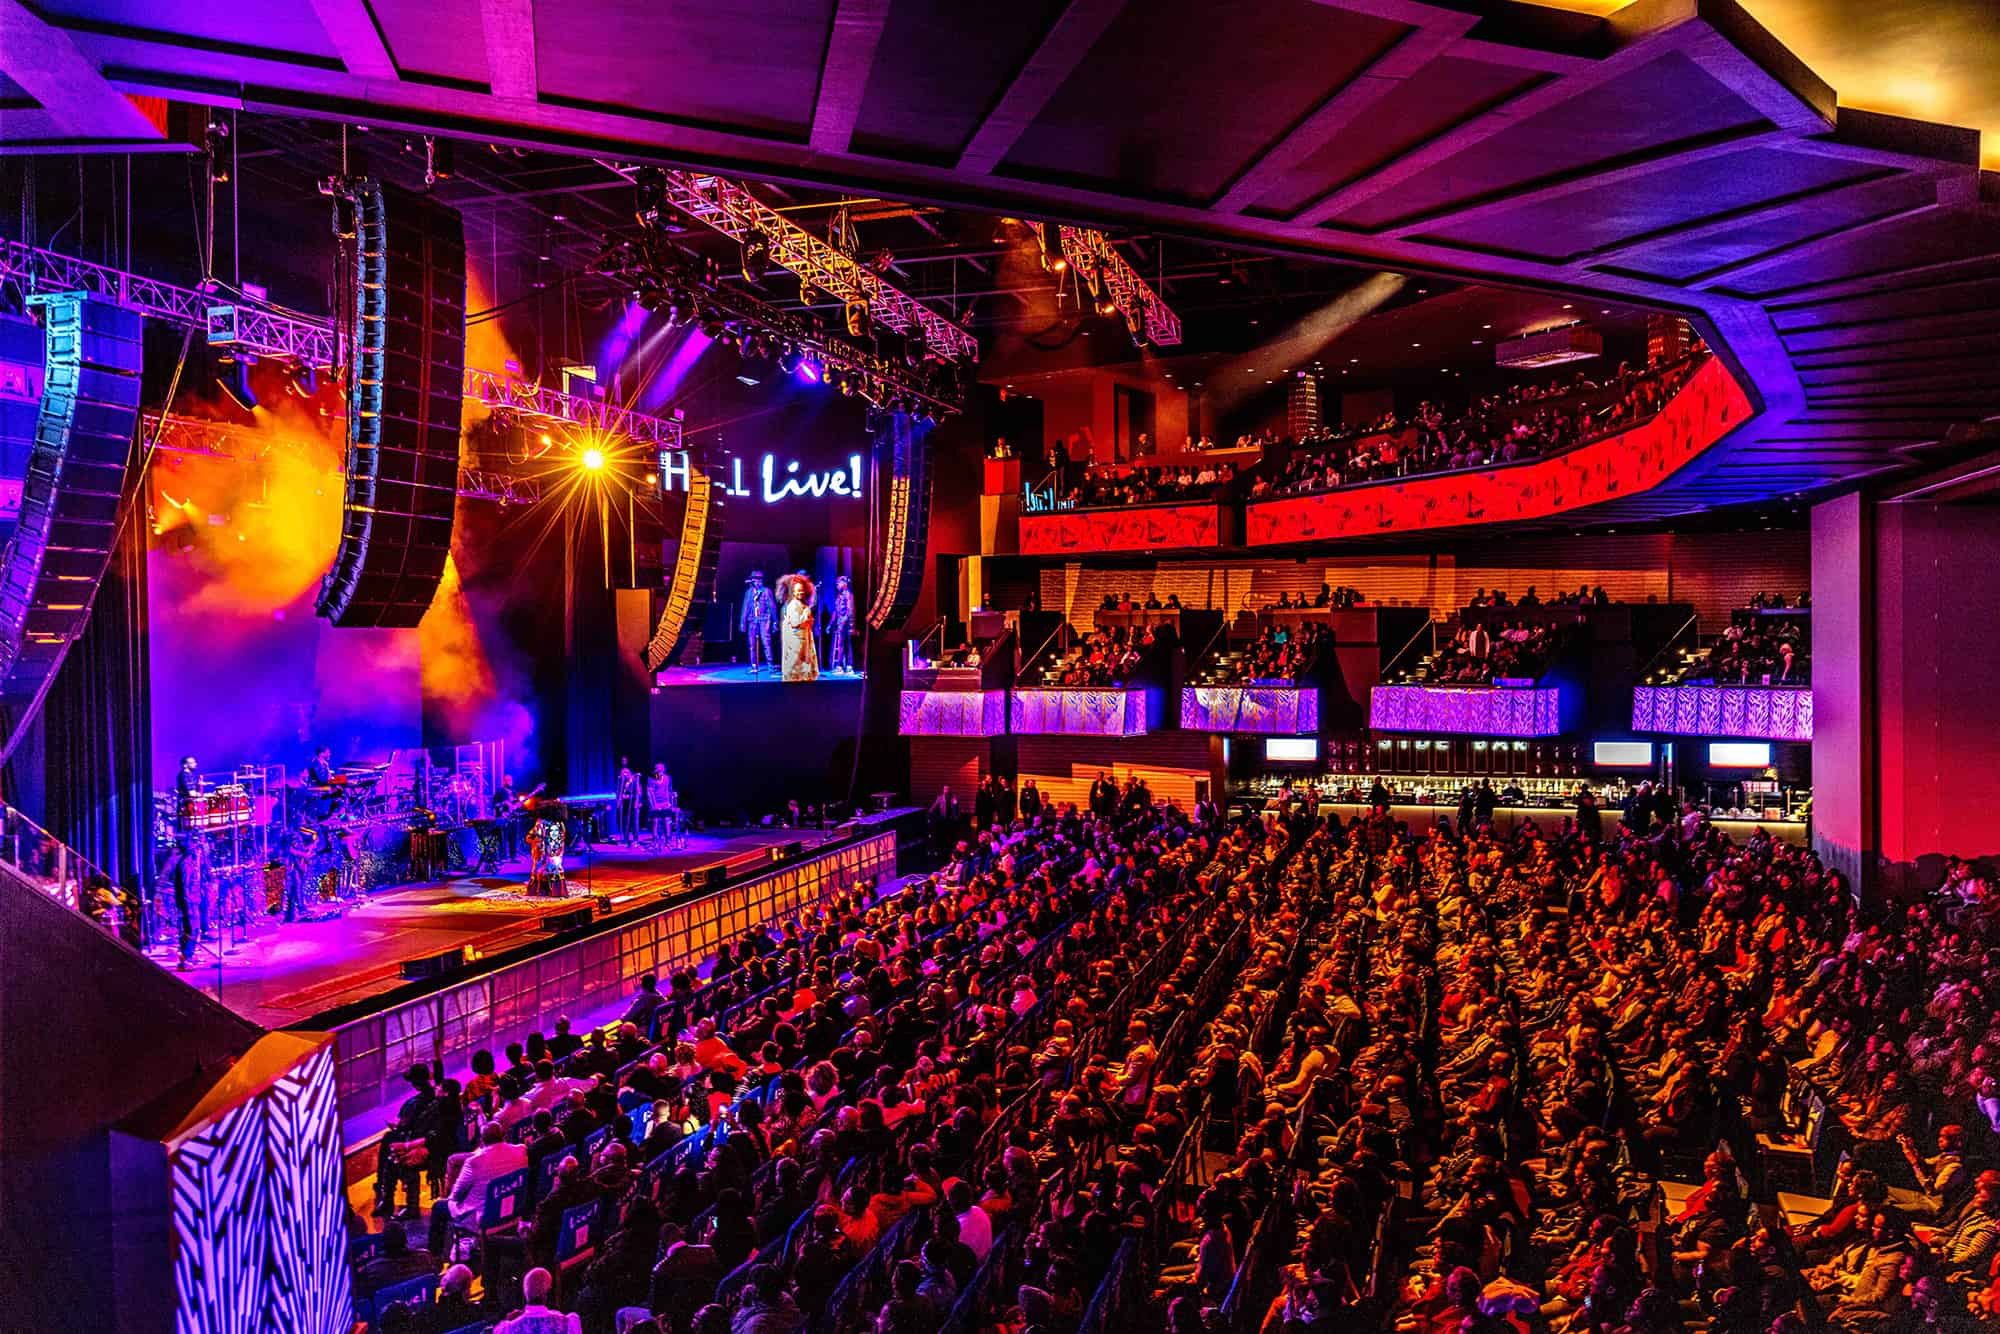 Large Entertainment Venue - The Hall at Live!